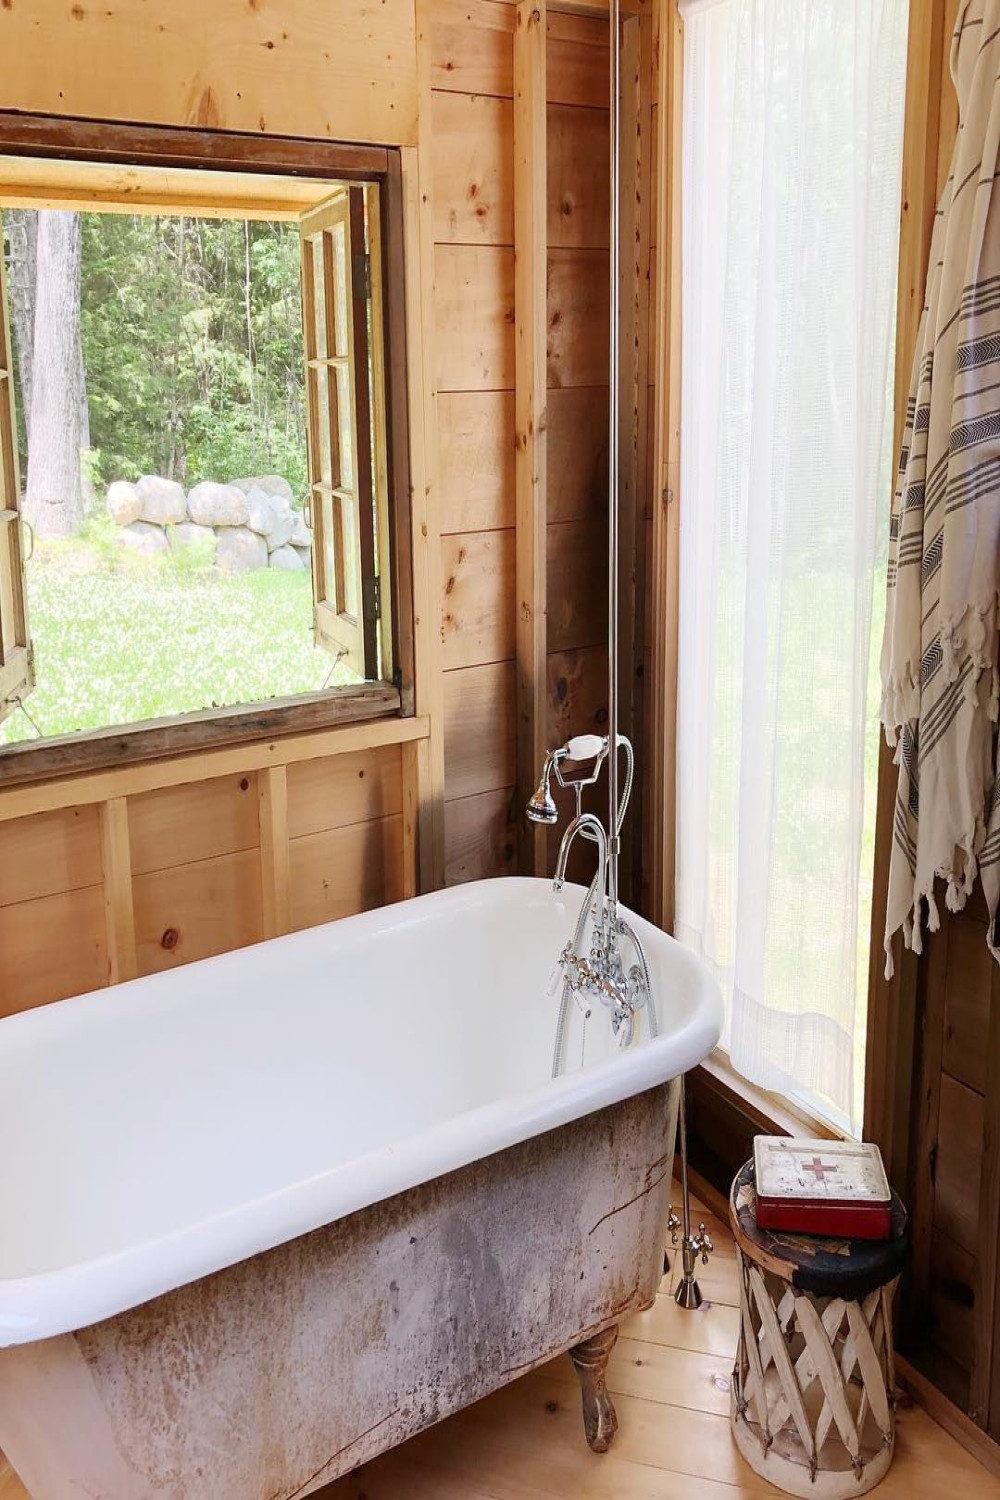 Best Rustic Bathroom Design Ideas to Try at Home